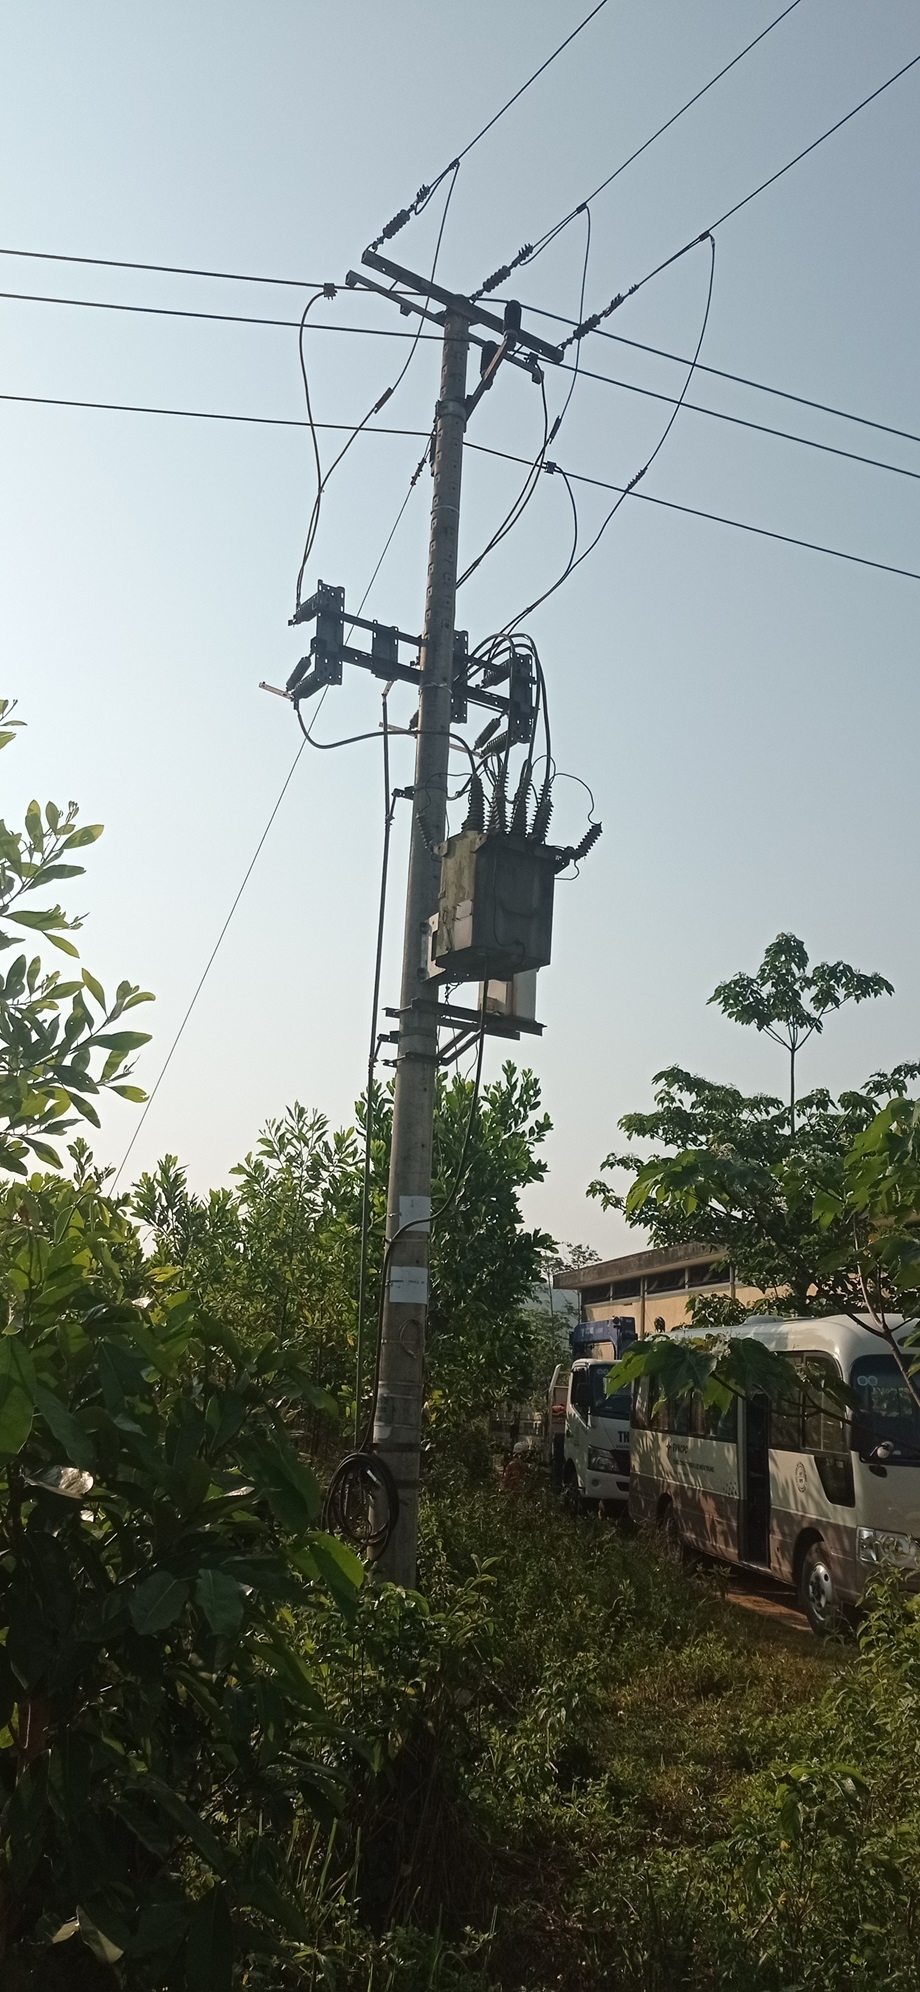 A telephone pole with wires and a box on it

Description automatically generated